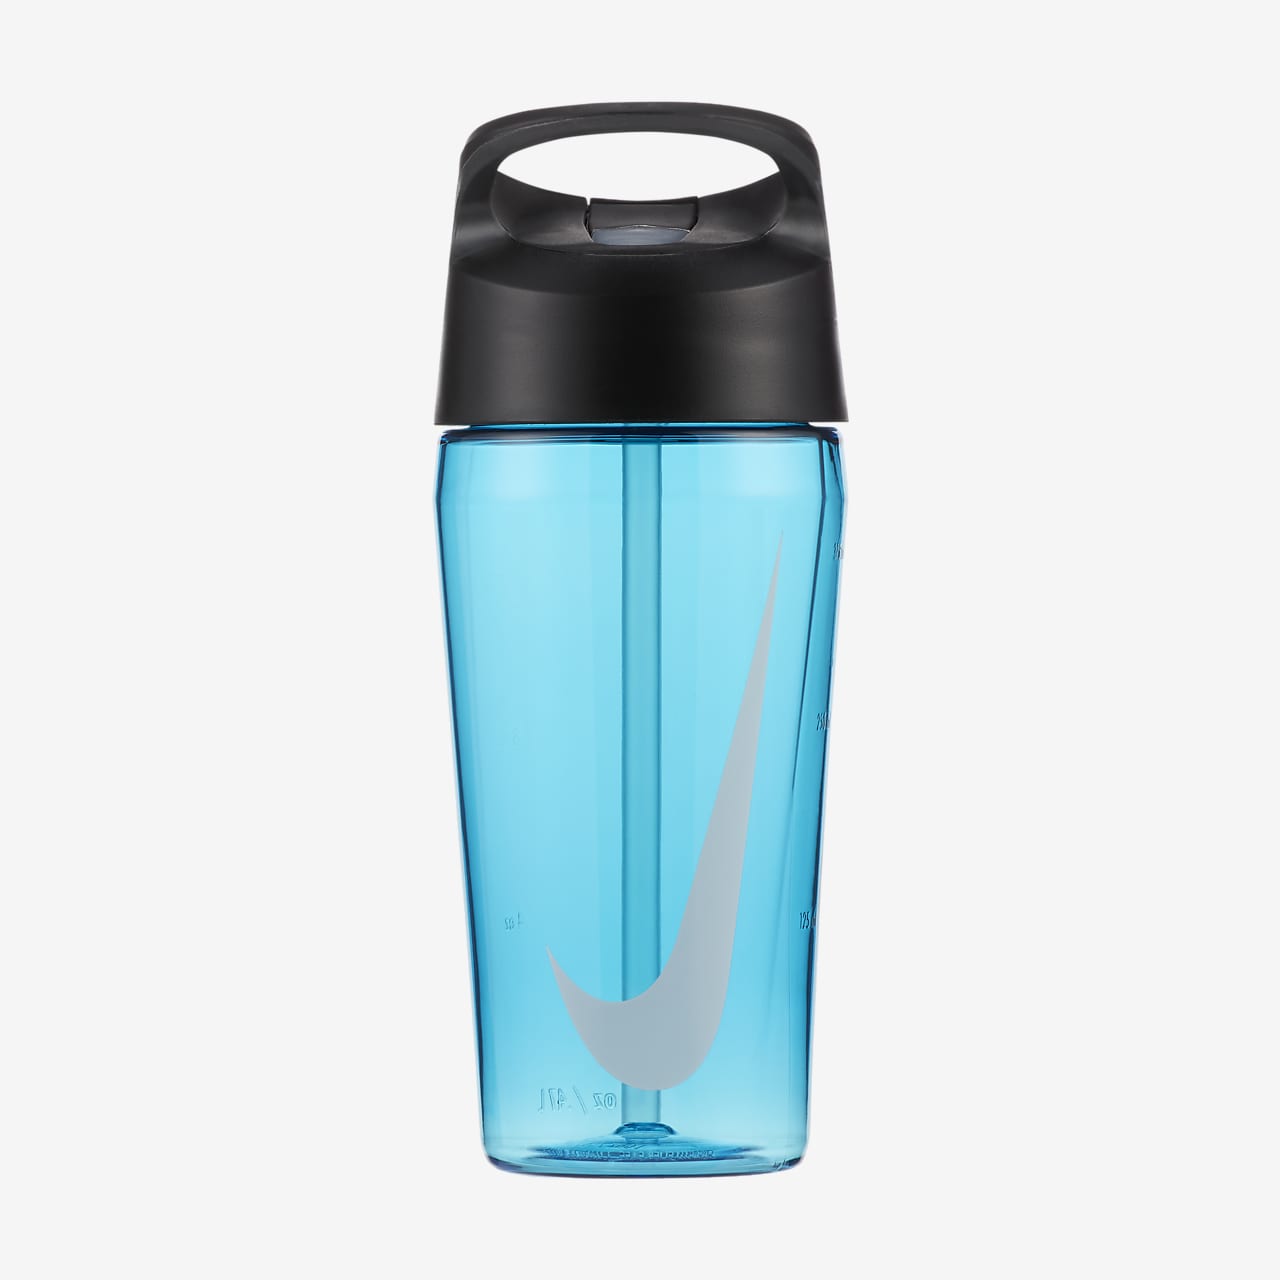 https://static.nike.com/a/images/t_PDP_1280_v1/f_auto/9bb4de6a-0745-4203-ad2d-54c0cb10c2ae/473ml-tr-hypercharge-straw-graphic-water-bottle-dLRXGB.png